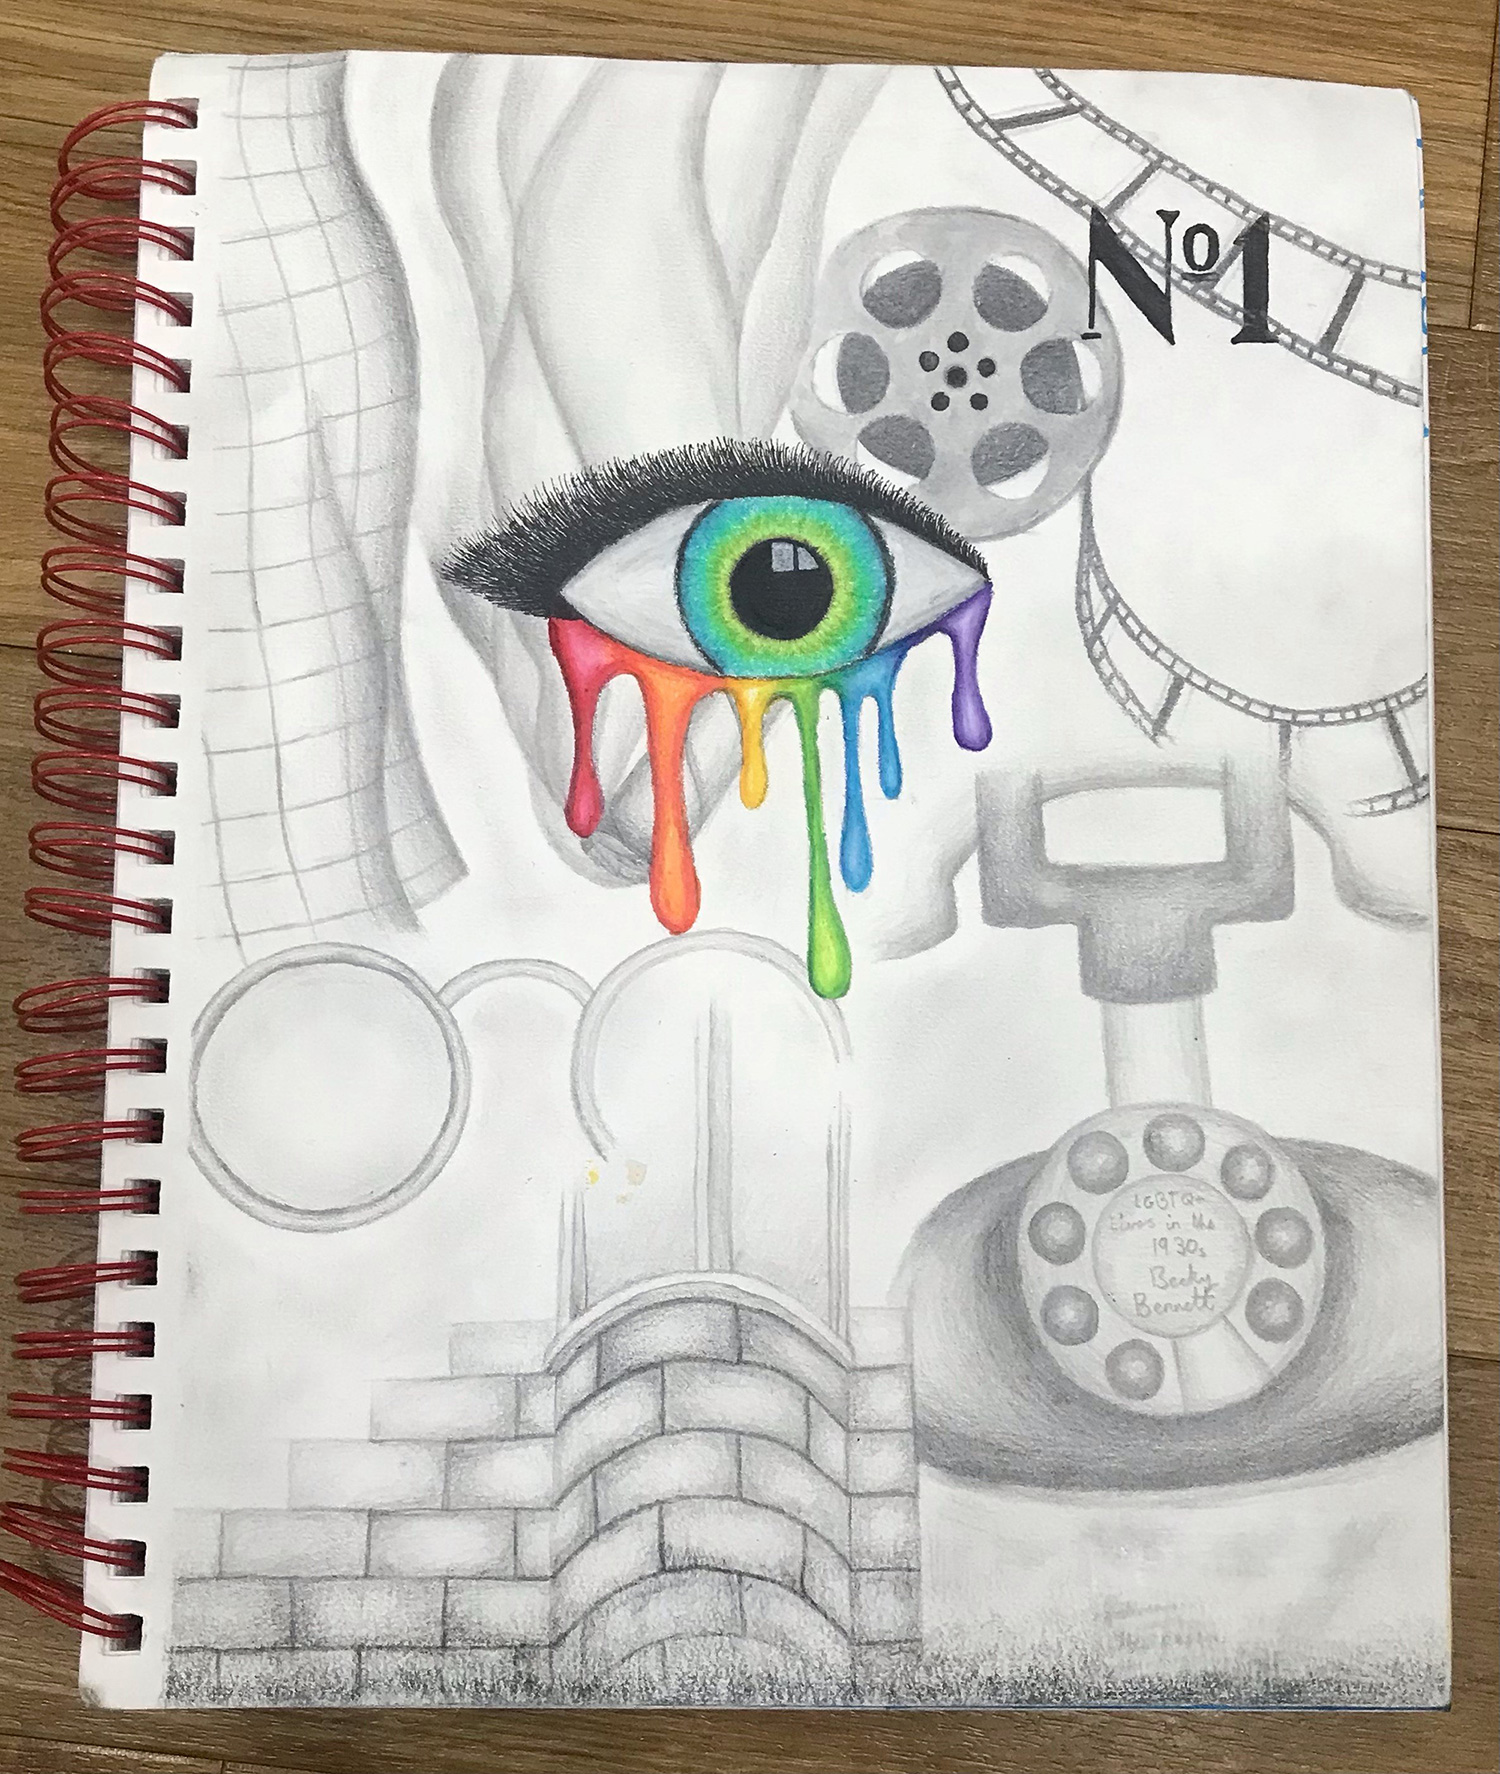 Pencil drawing of an eye that is crying rainbow tears against the grey images in the background.